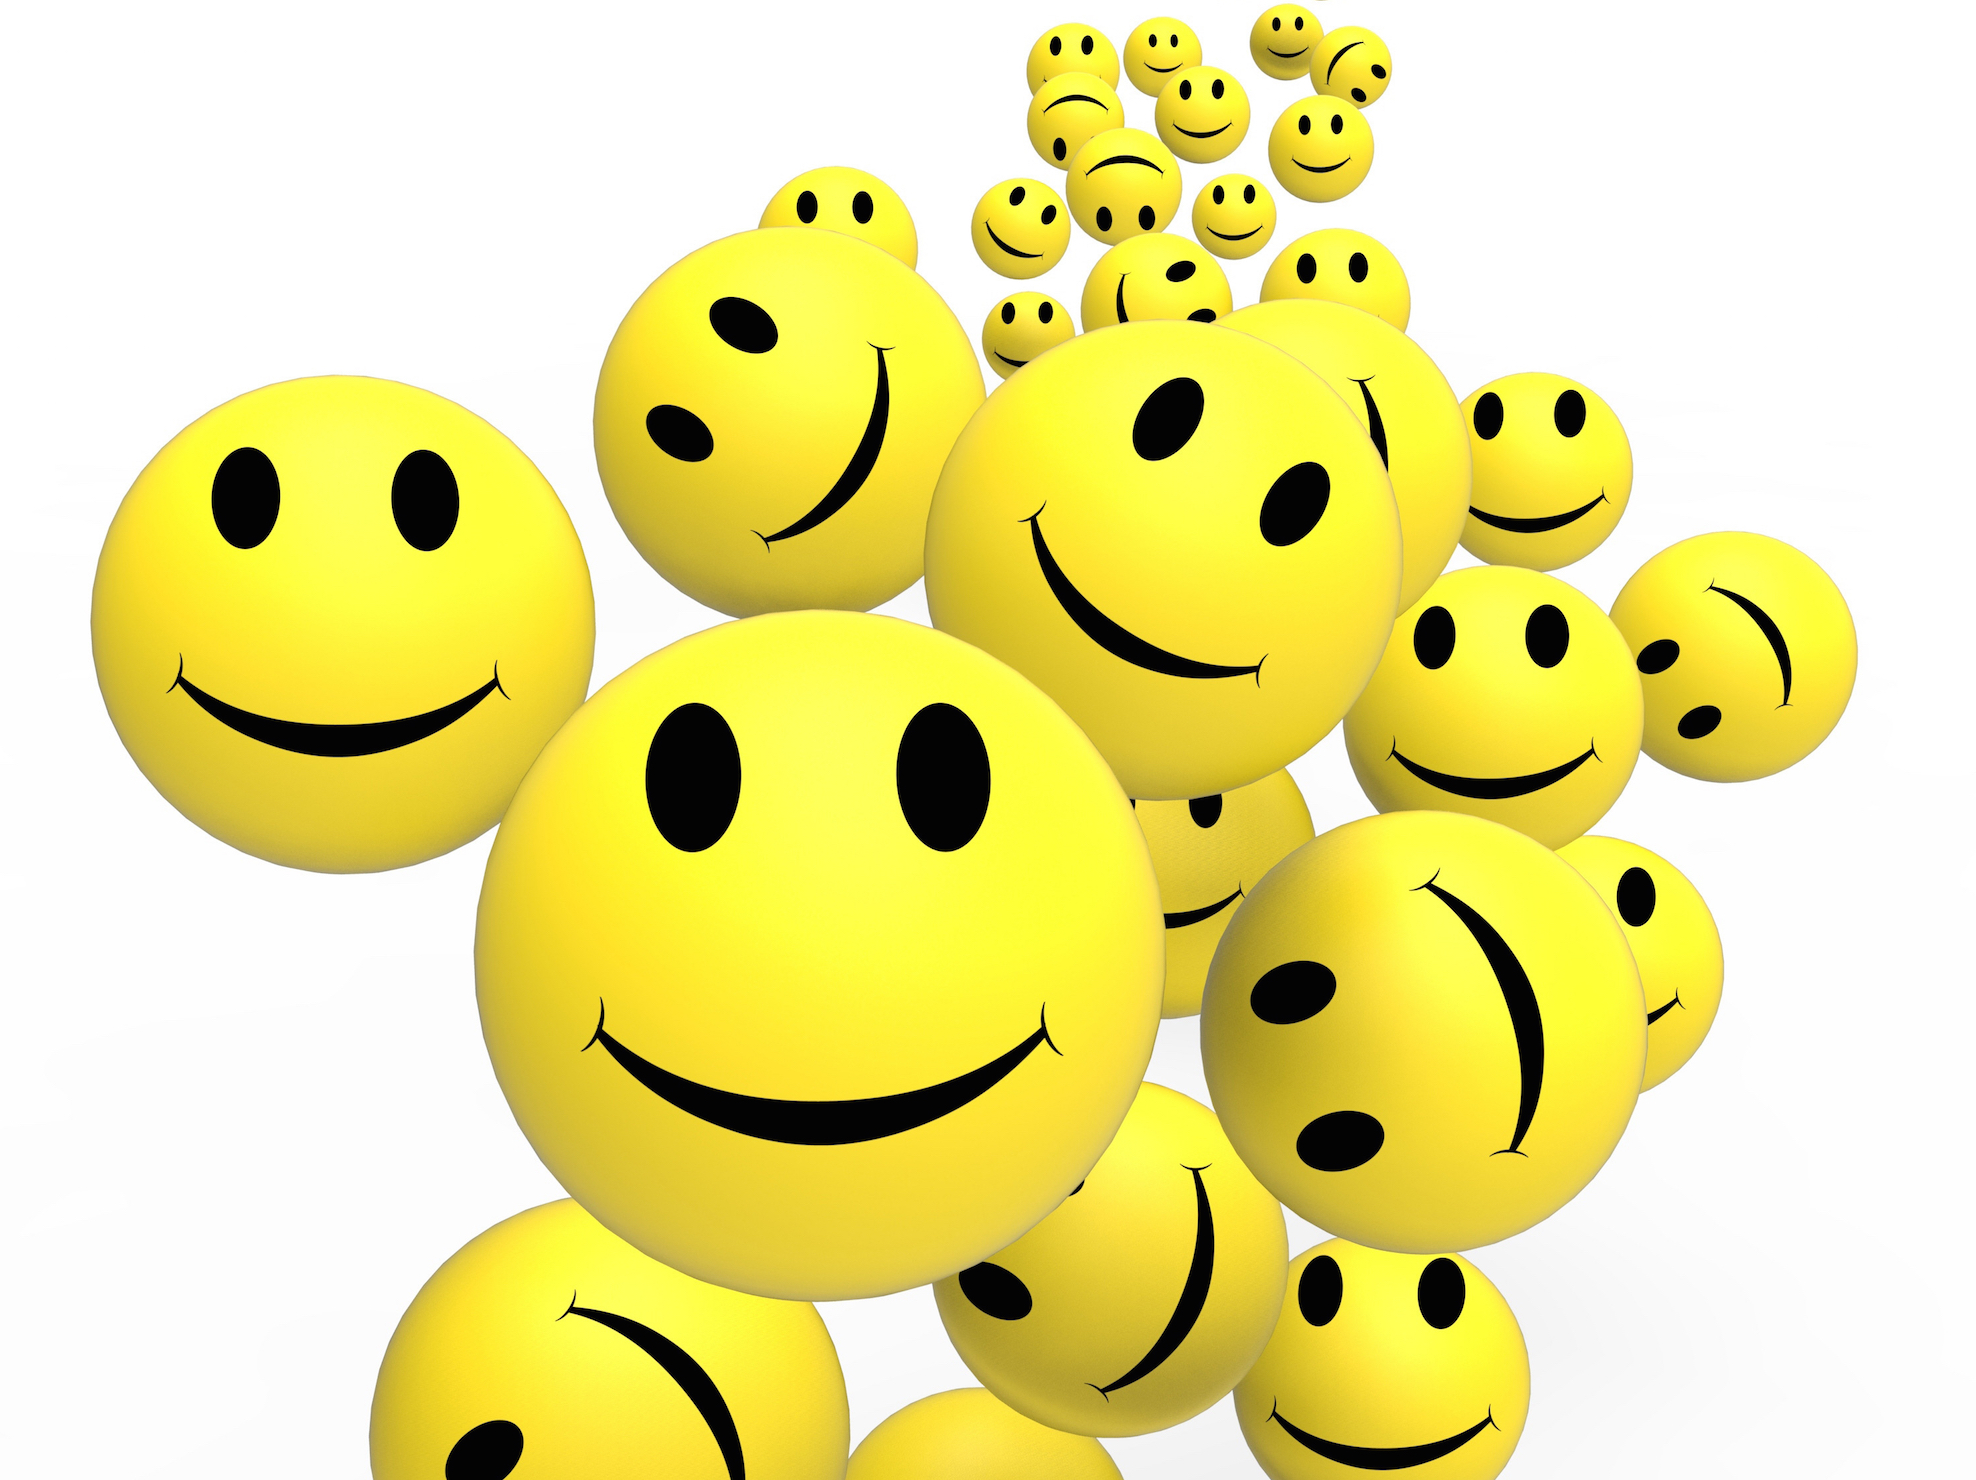 Smileys Show Happy Cheerful And Positive Faces.